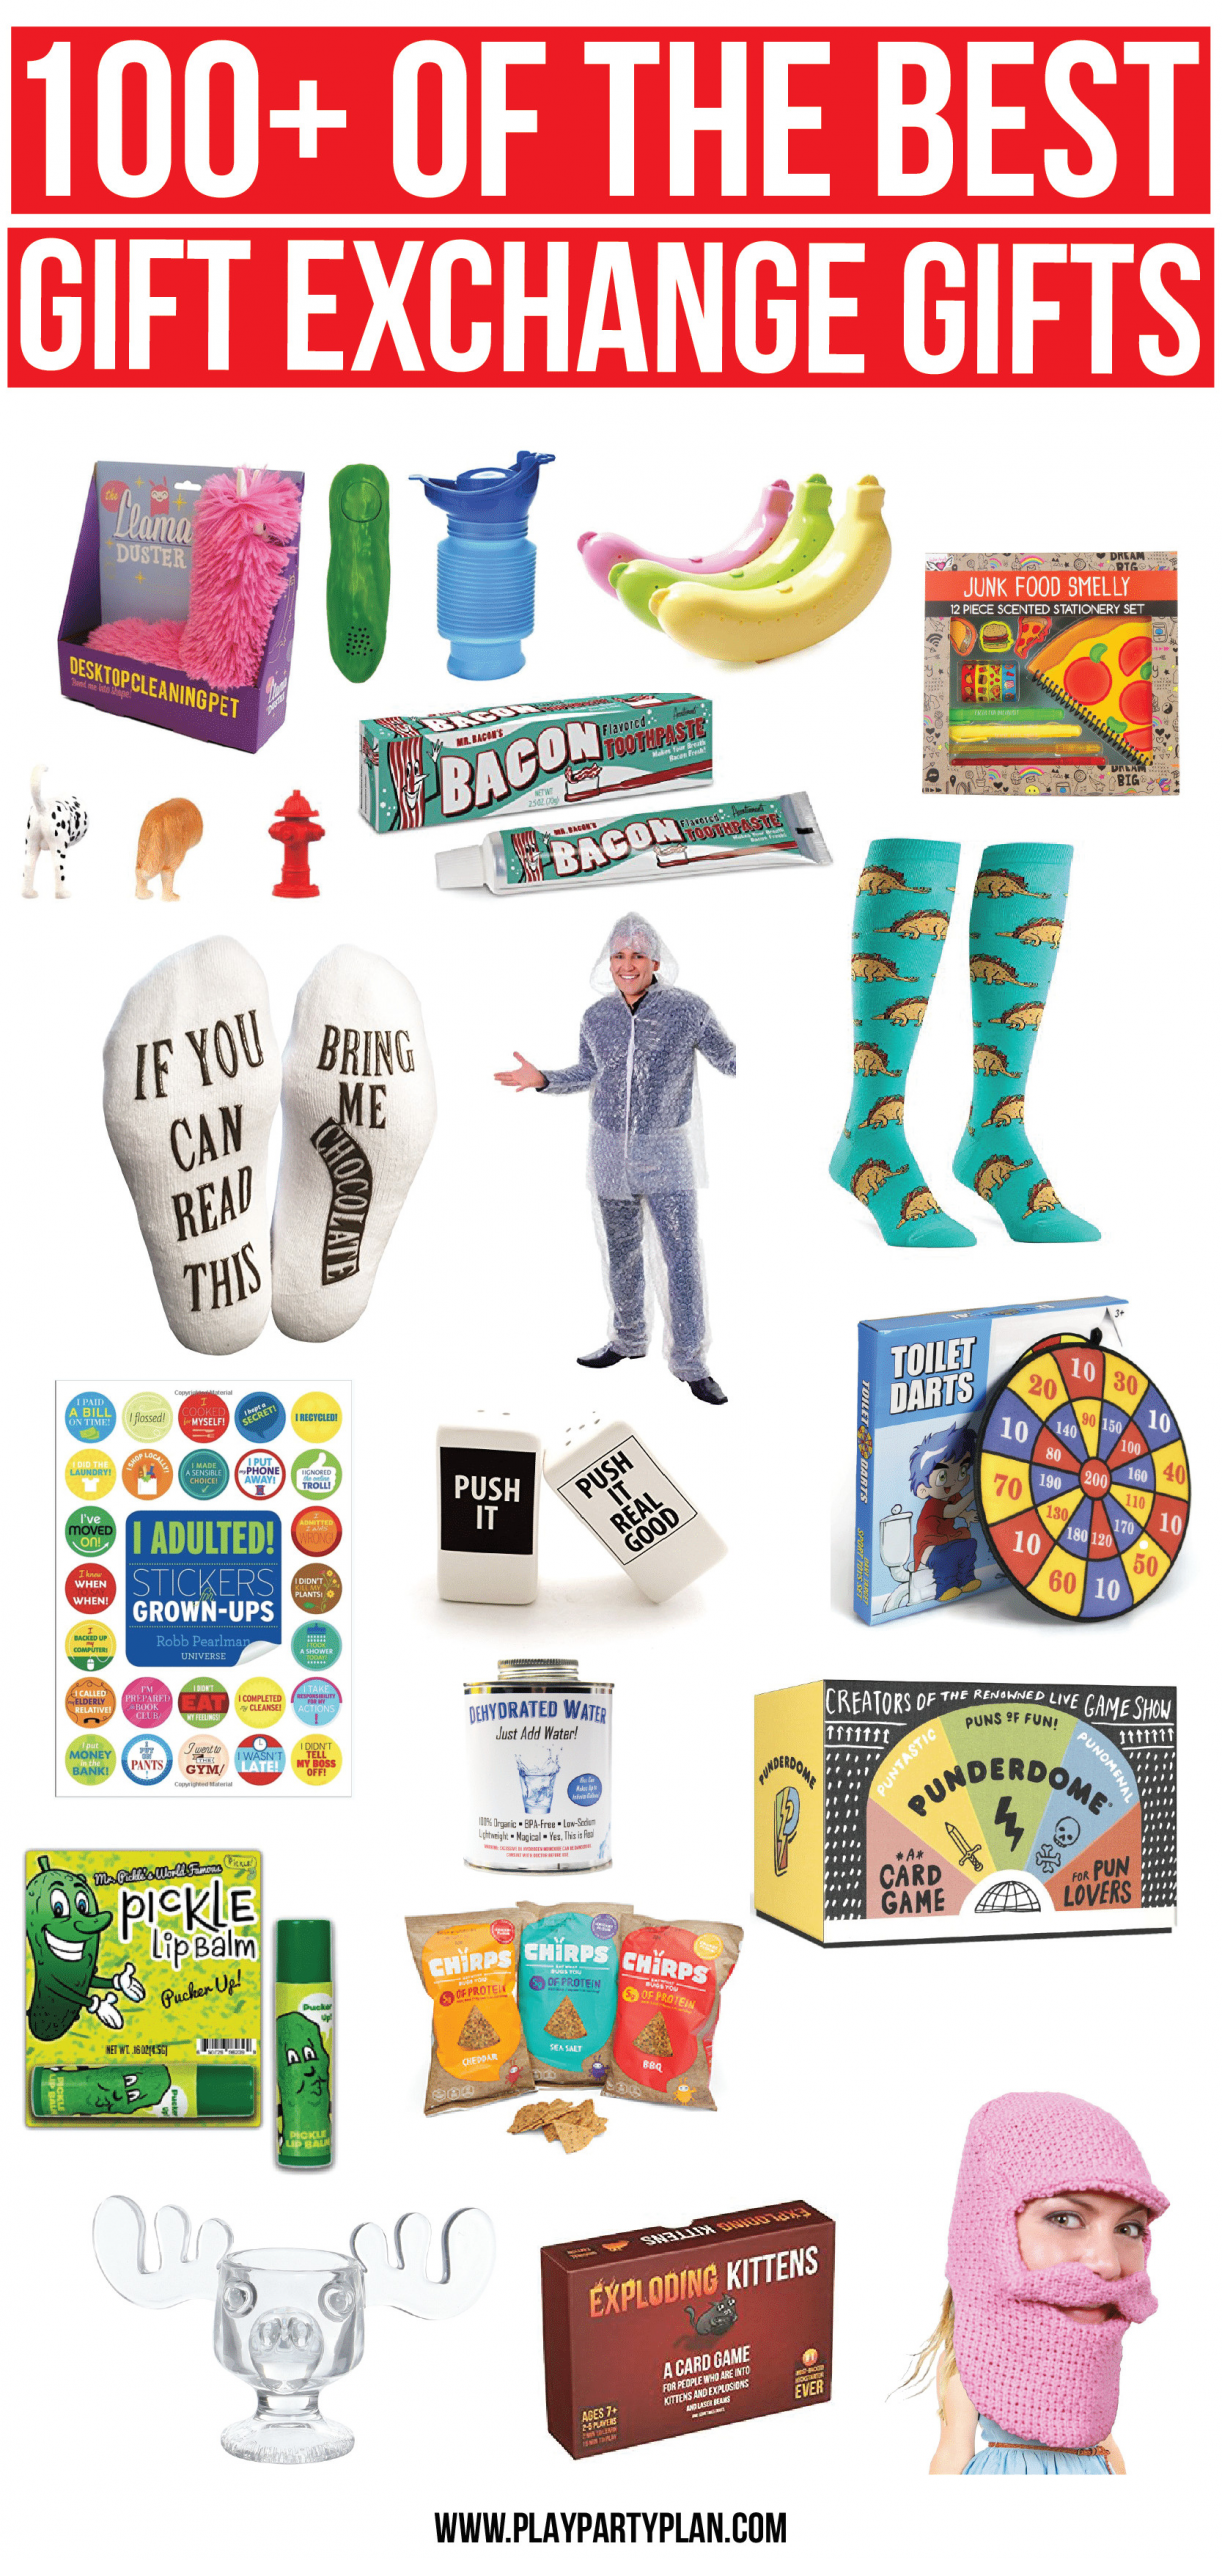 Holiday Party Gift Exchange Ideas
 100 of the Best White Elephant Gifts & Other Gift Ideas